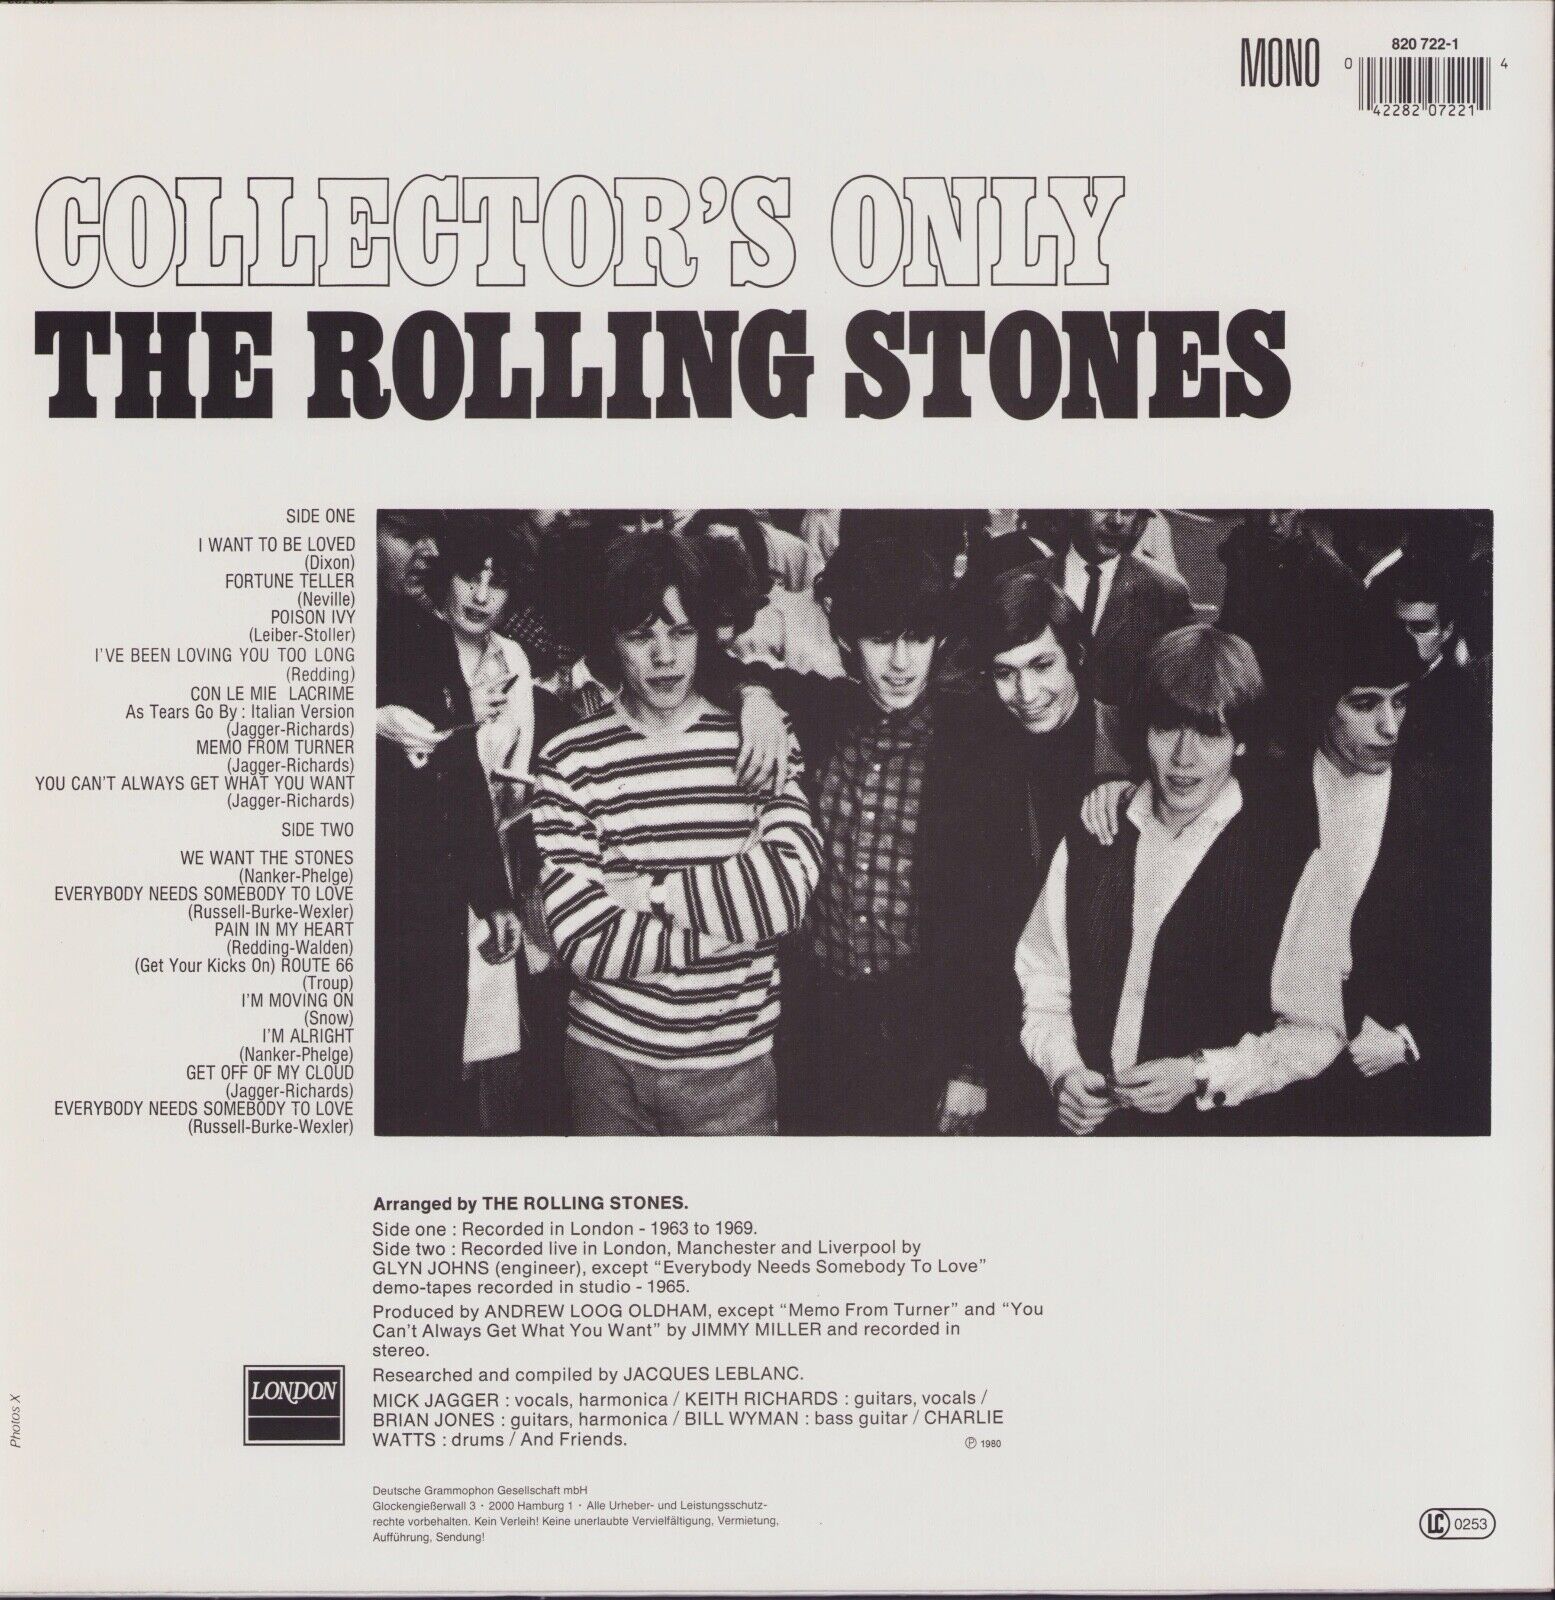 The Rolling Stones ‎- Collector's Only Vinyl LP